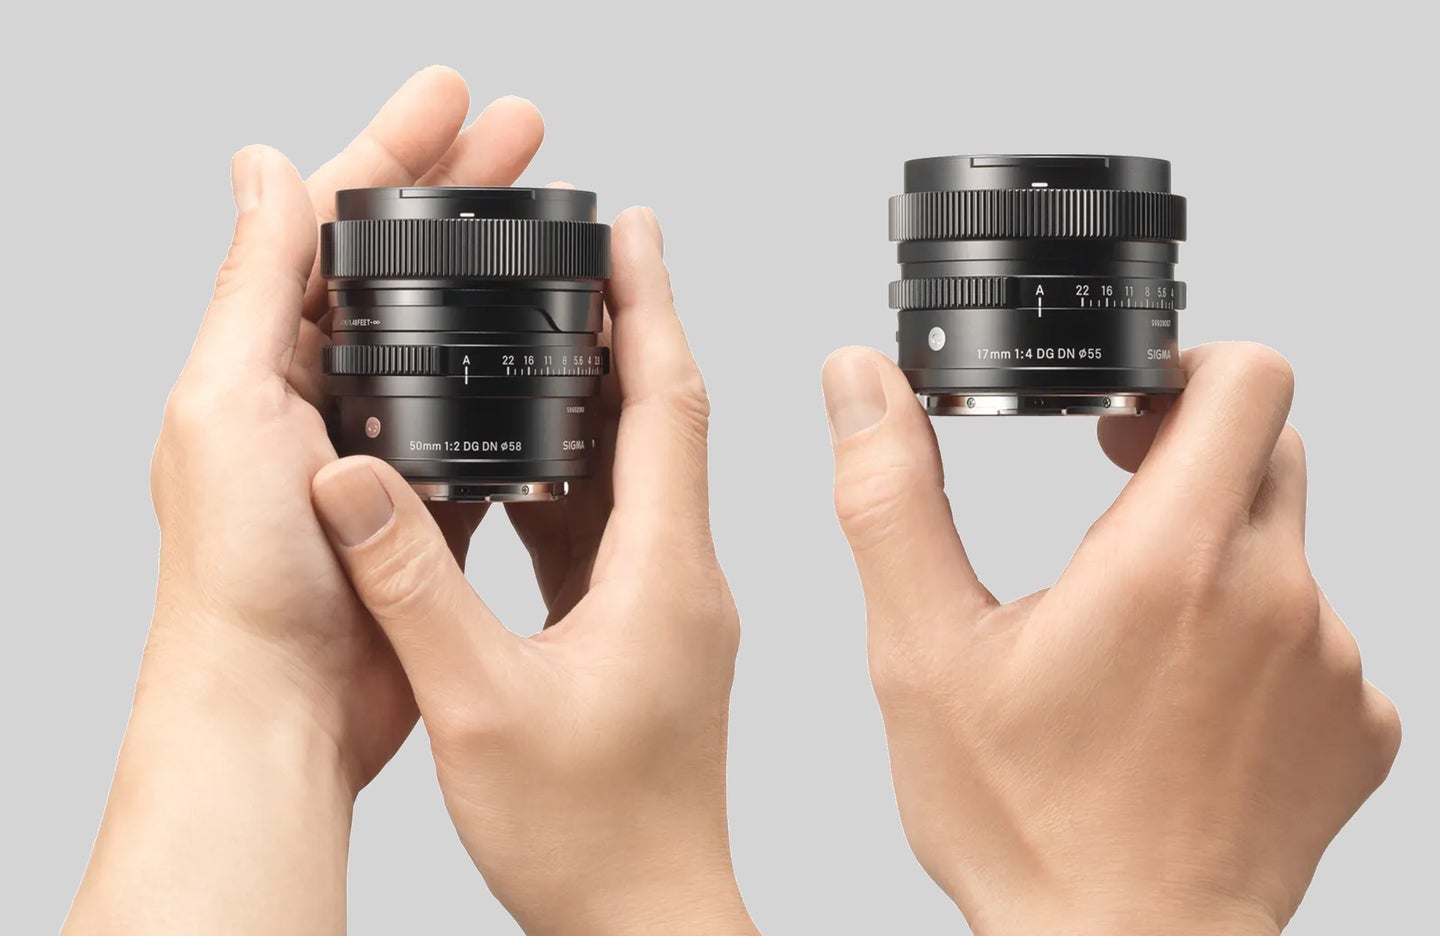 Sigma I series prime lenses 50mm f/2 and 17mm f/4 in hands